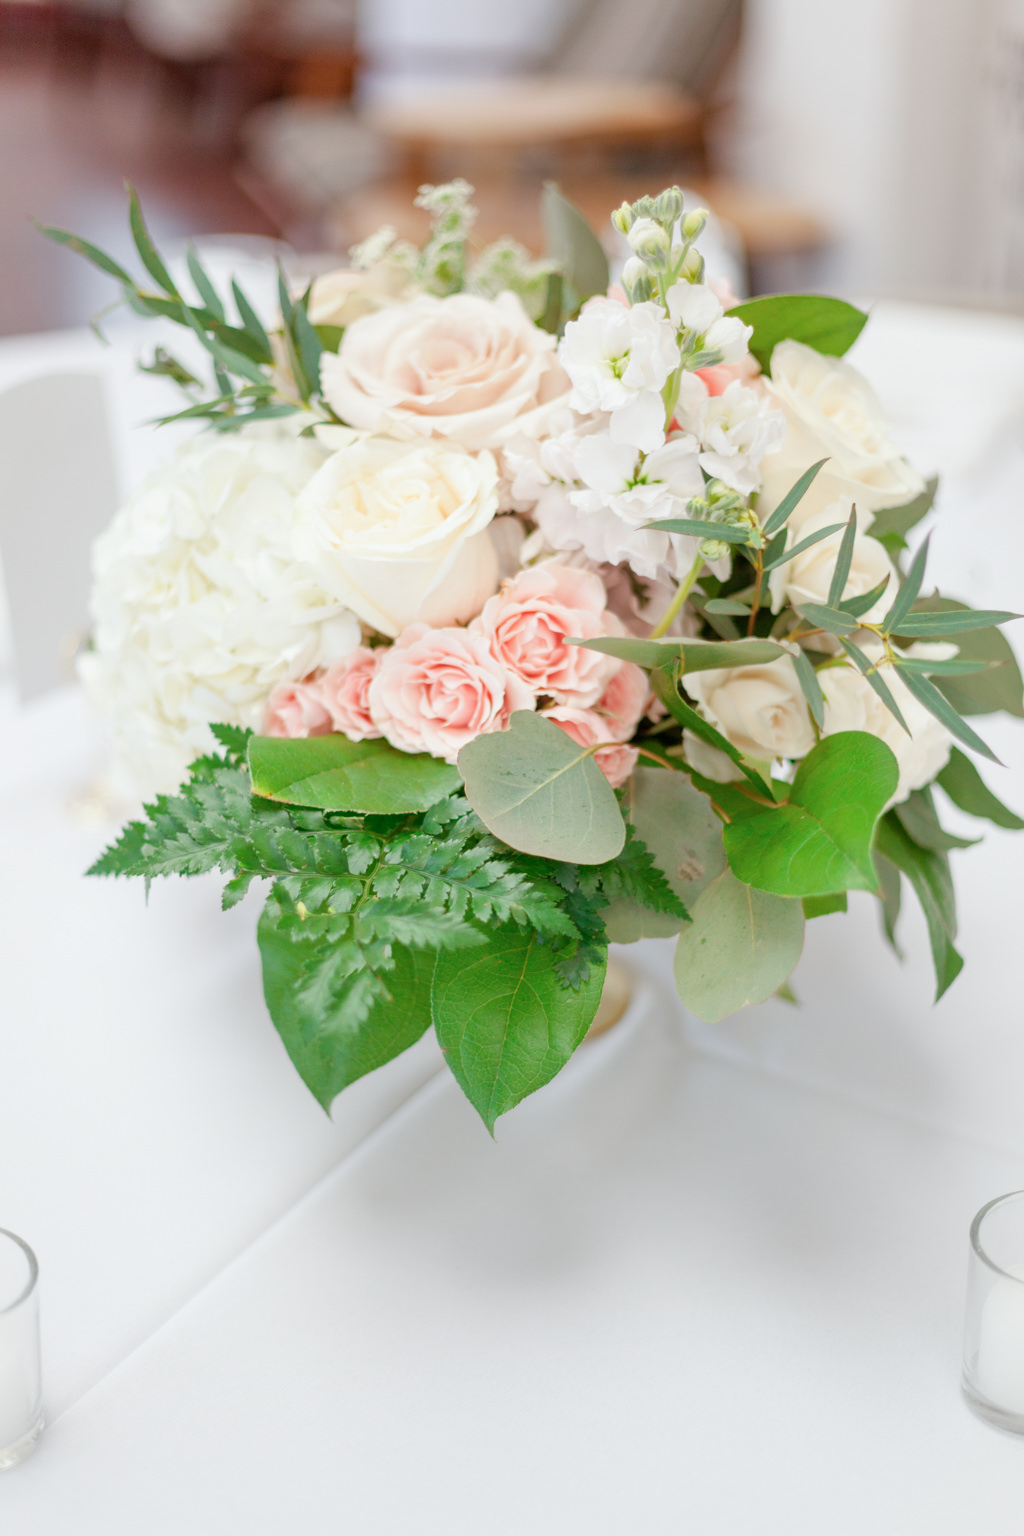 Indoor Wedding Reception with Round White Tables and Small Peach and White Floral with Greenery Centerpiece | Tampa Bay Wedding Florist Cotton and Magnolia